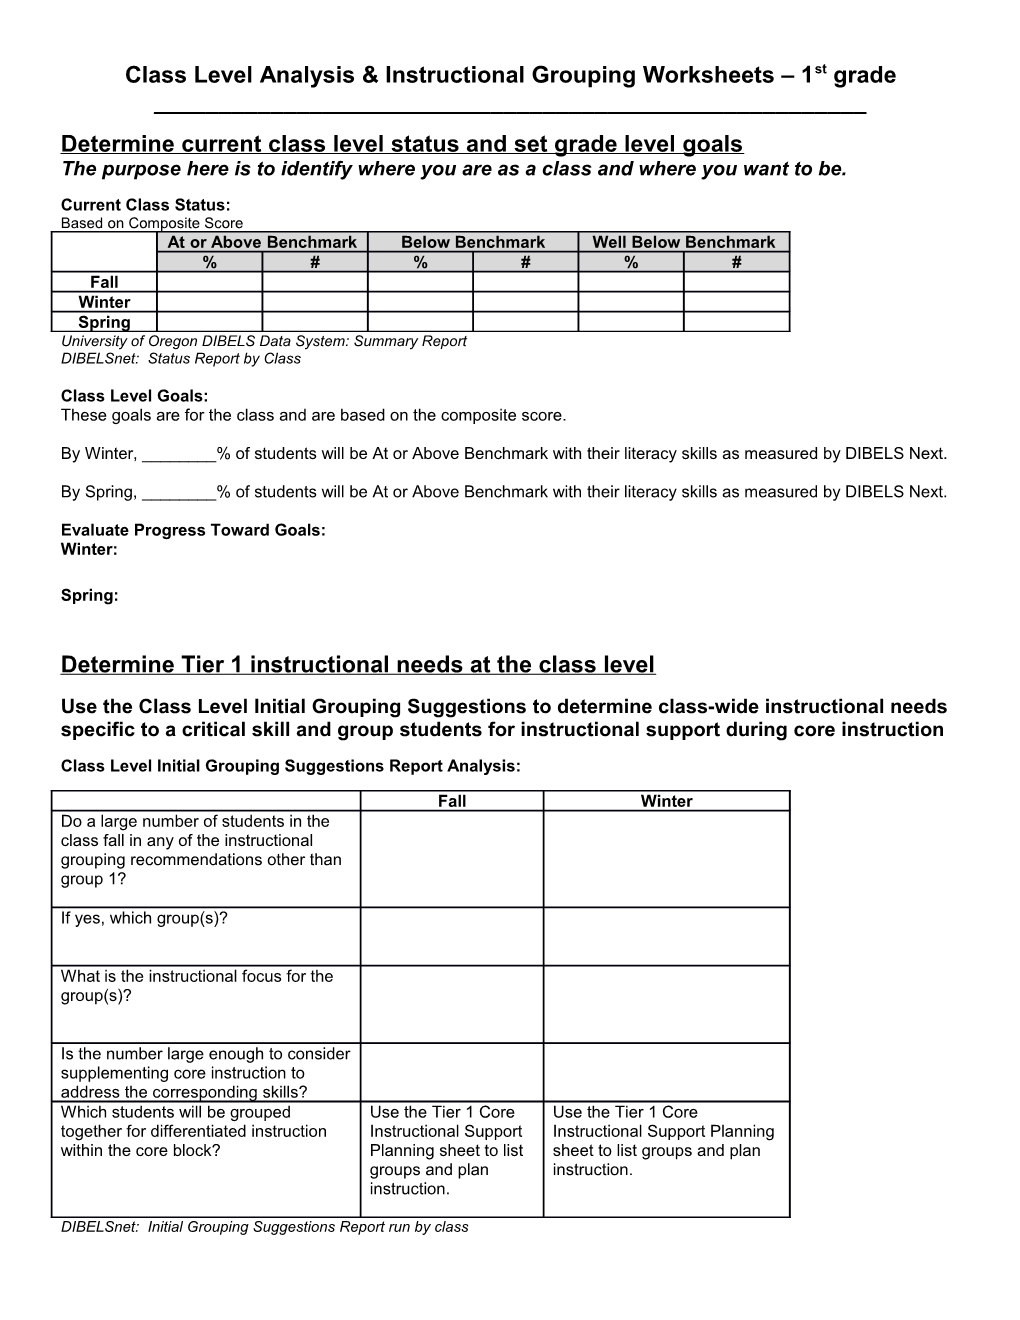 Class Level Analysis & Instructional Grouping Worksheets 1St Grade